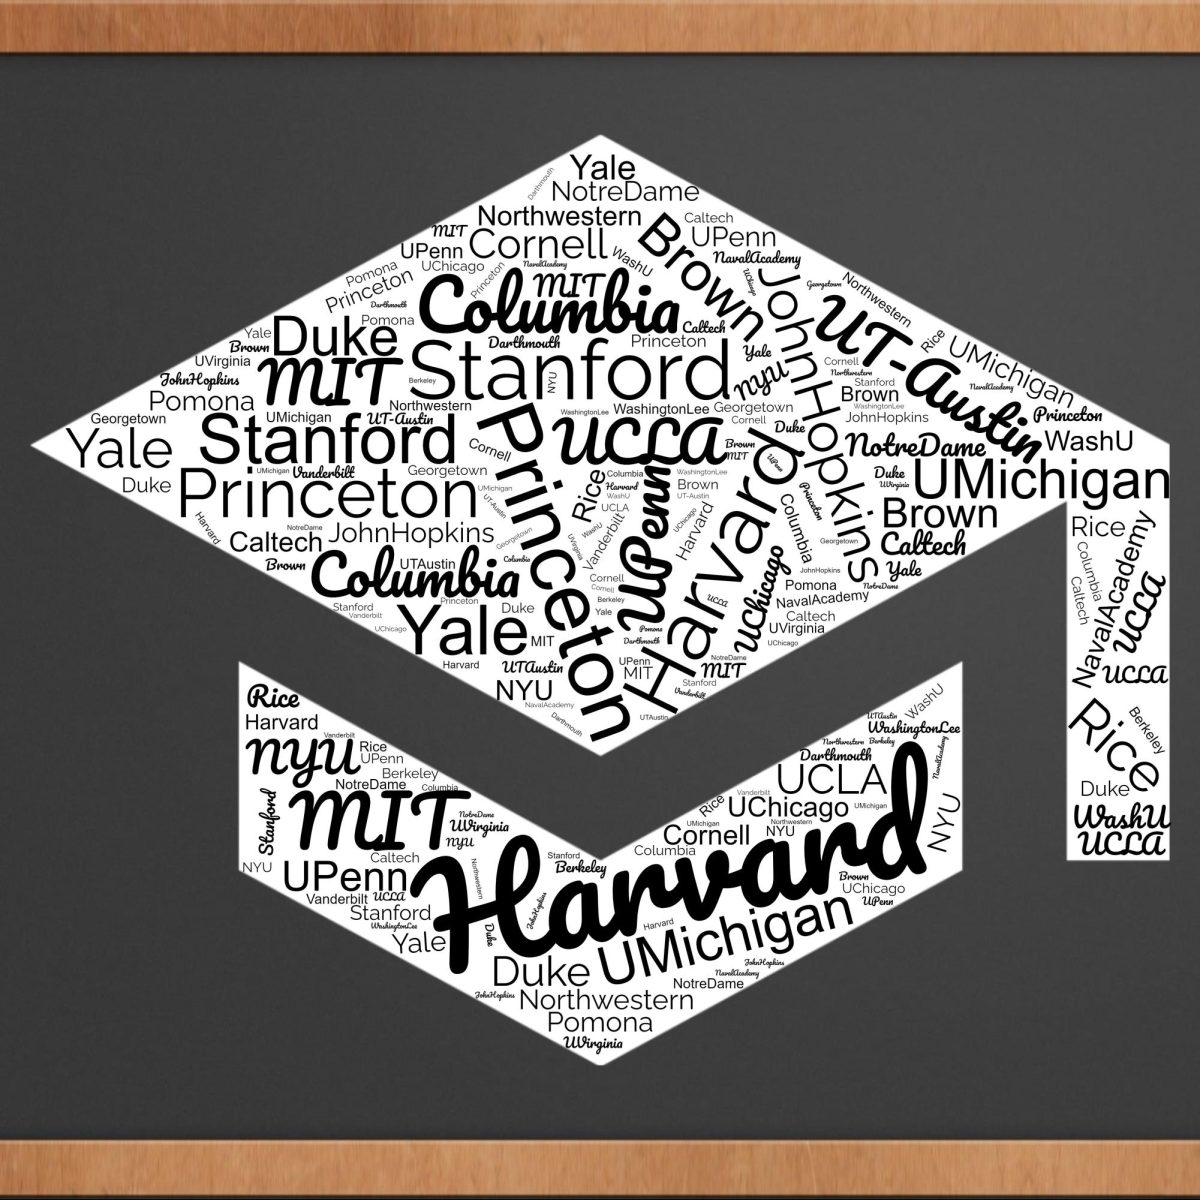 This is a word cloud of students dream schools from several polls, with size indicating desirability. Students overwhelmingly set their sights on Ivy Leagues and other schools with 5% admission rates, ignoring more realistic options.